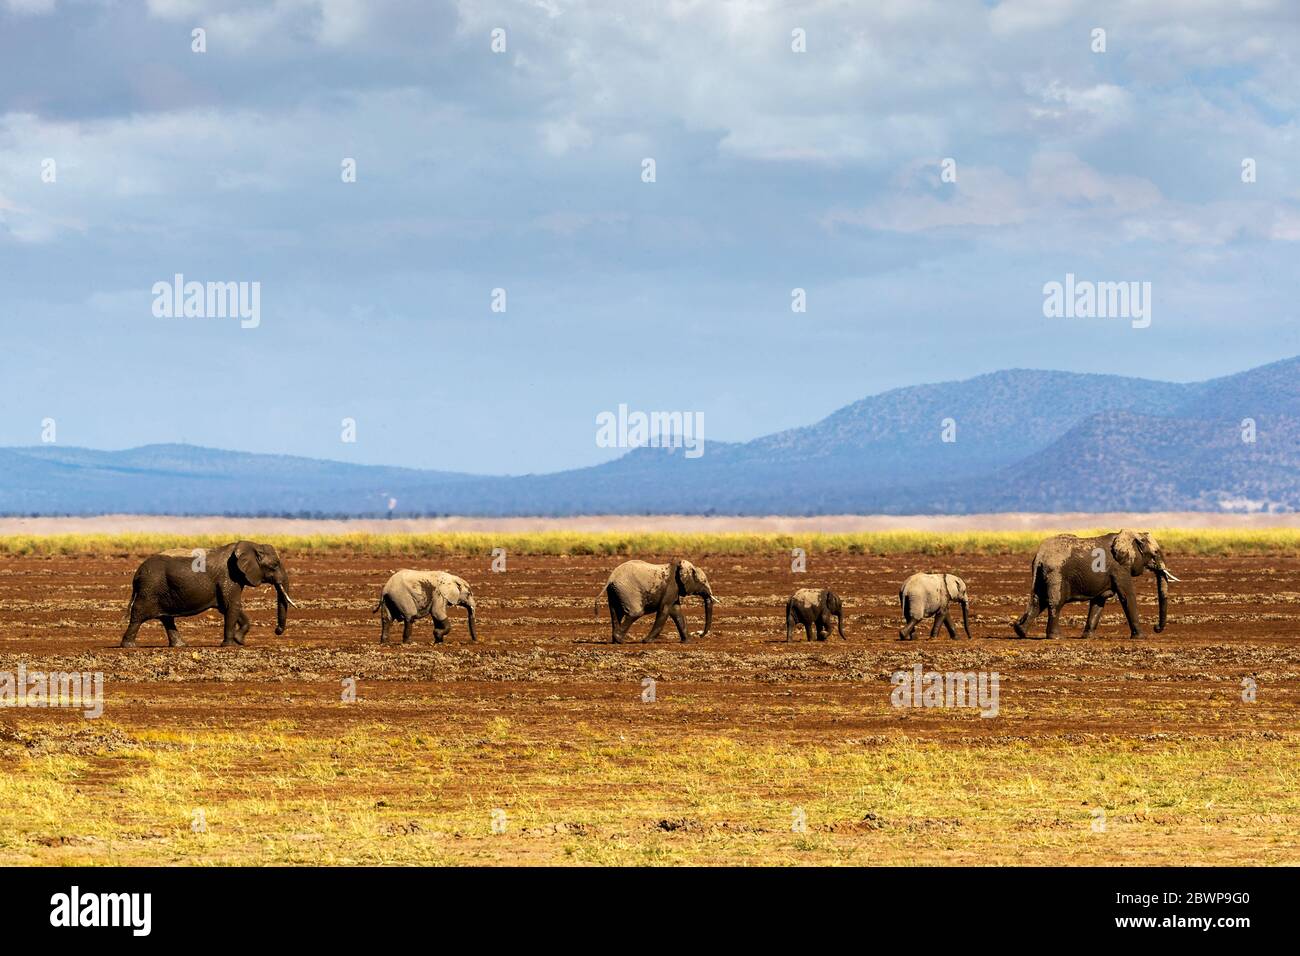 Family of African elephants walking together in a row through a dried river bed in Amboseli, Kenya in Africa Stock Photo